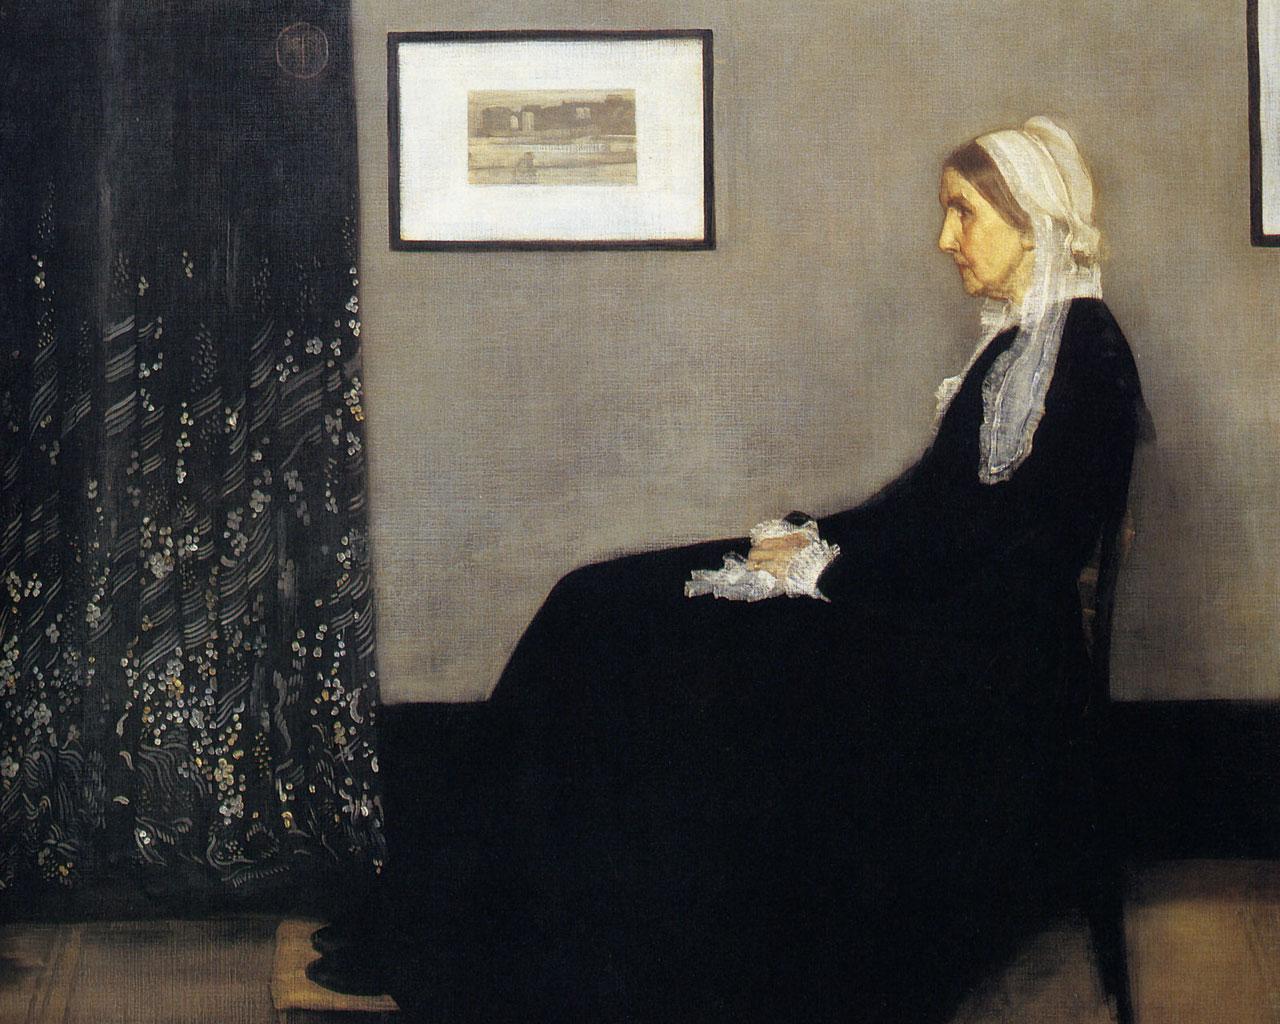 James McNeill Whistler - Arrangement in Grey and Black - The Artist's Mother (1871) Wallpaper #2 1280 x 1024 